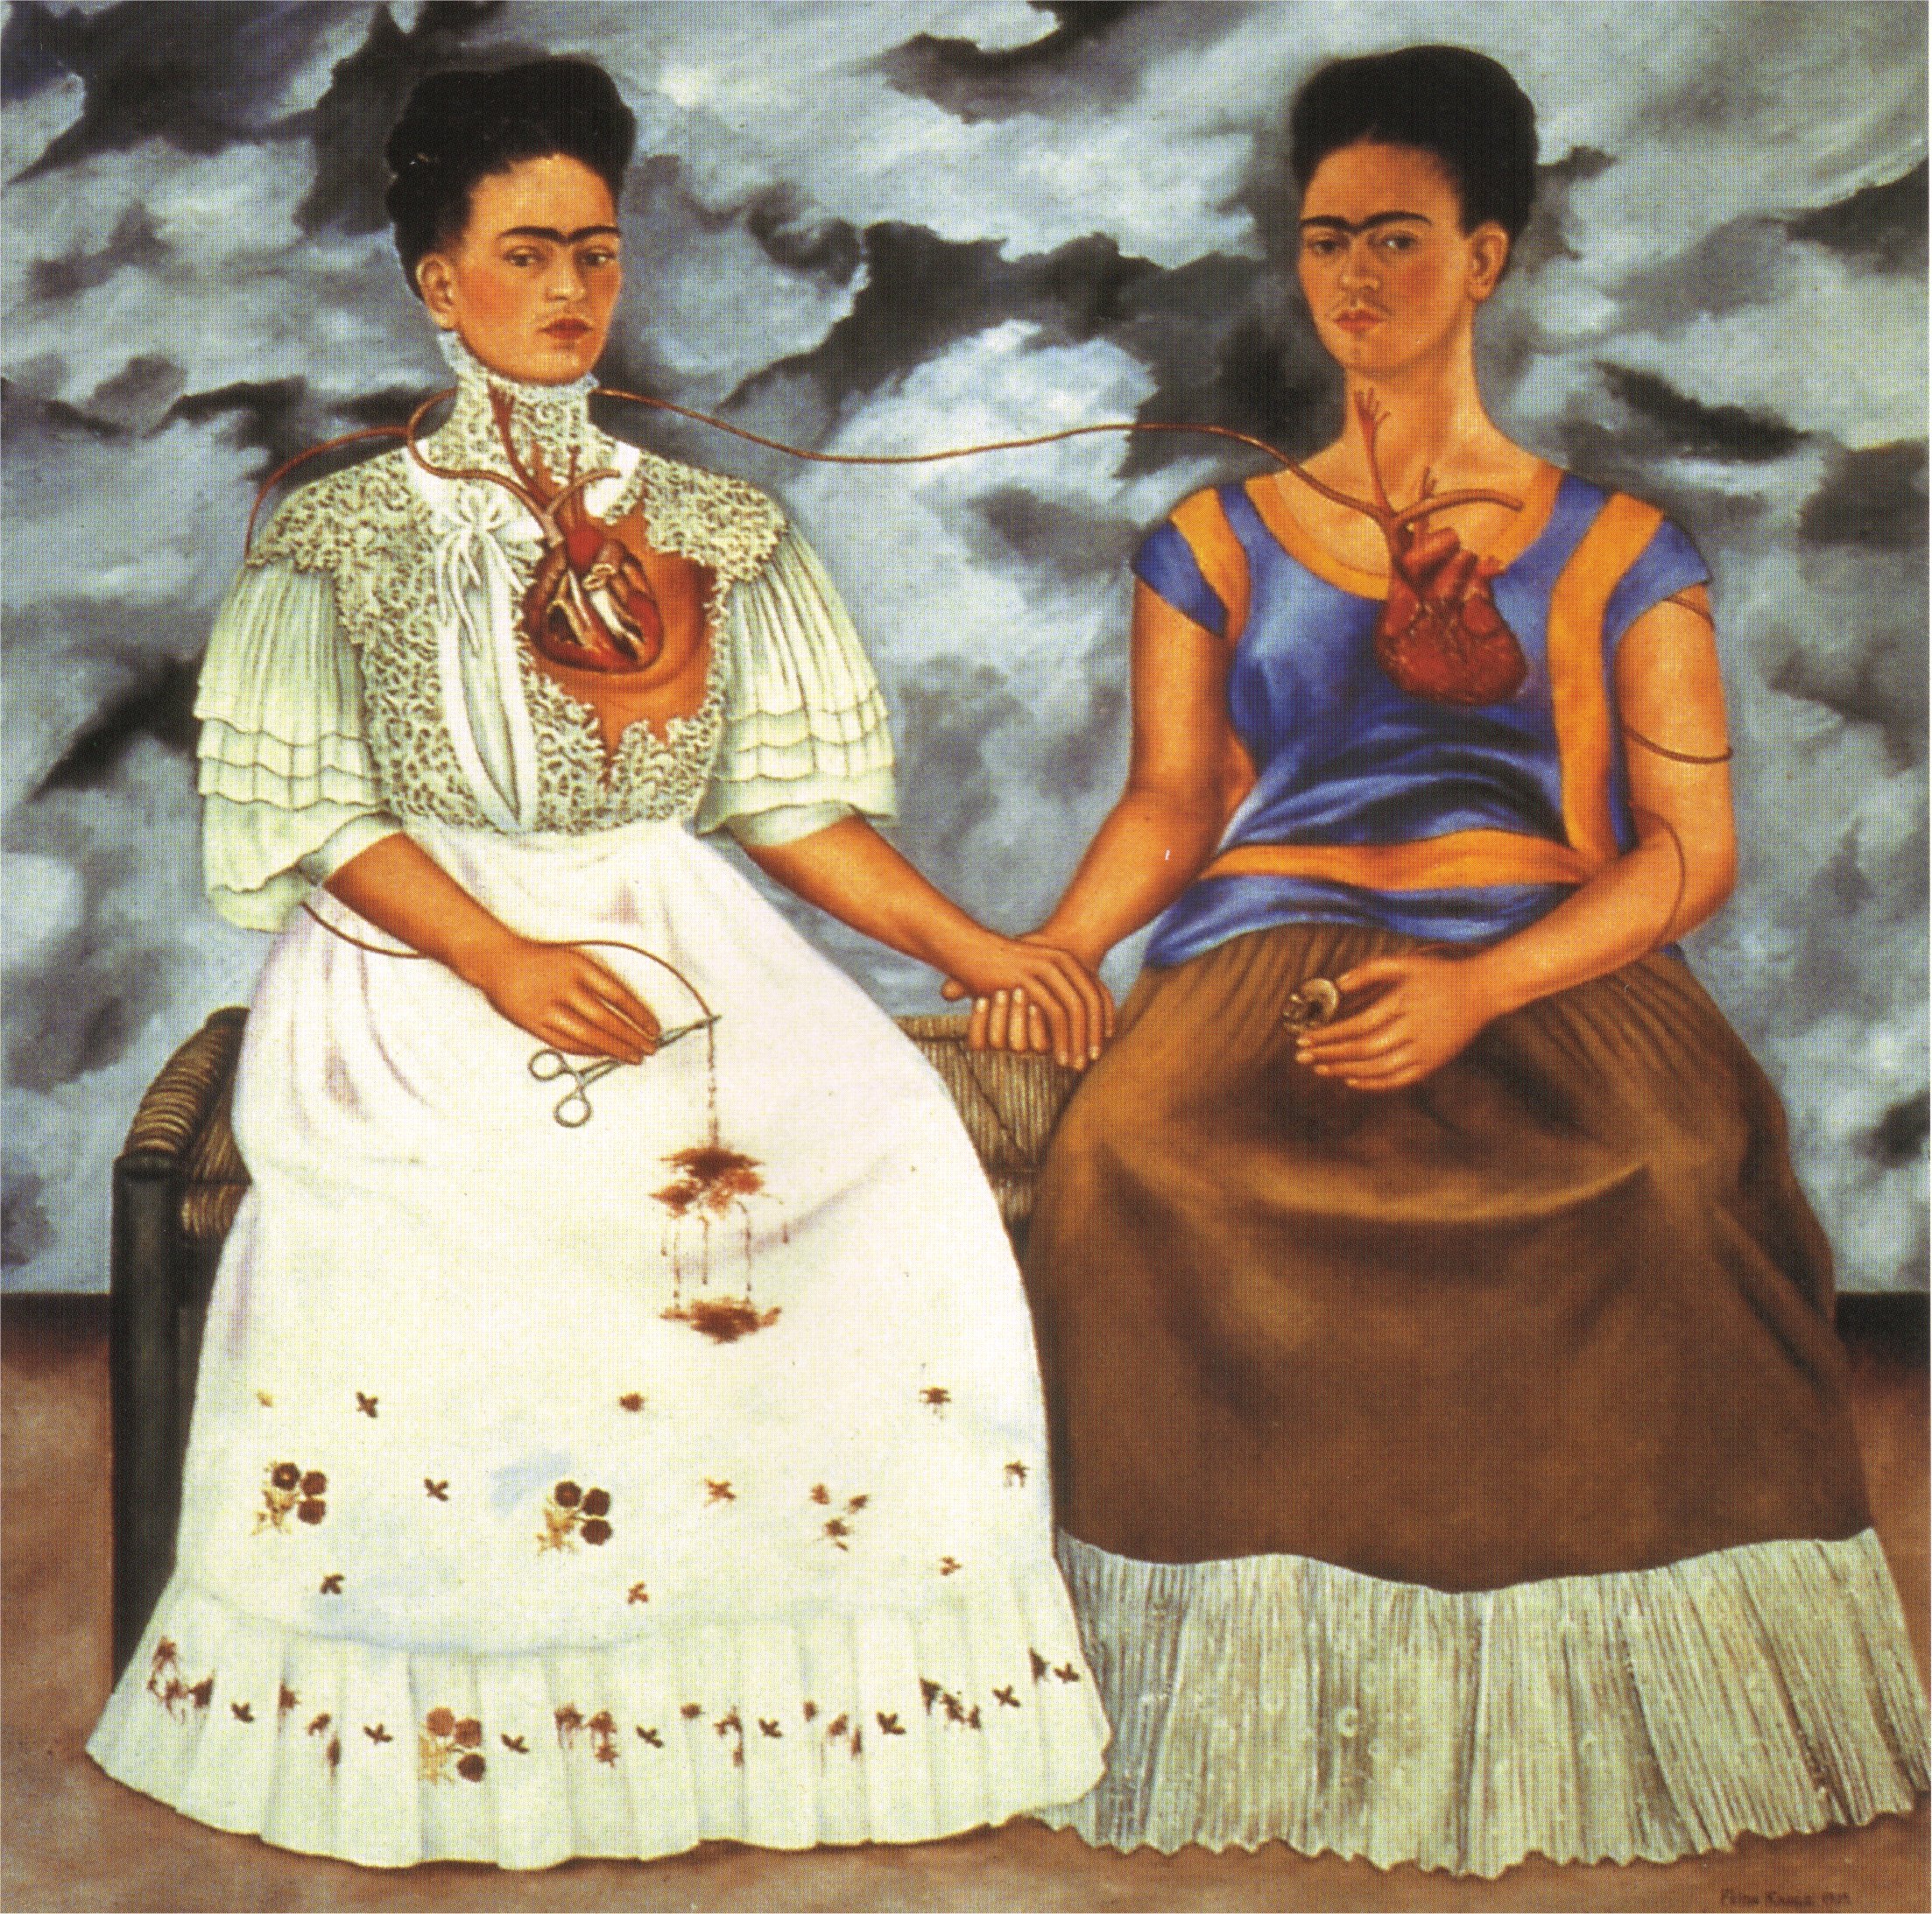 The Two Fridas (1939).